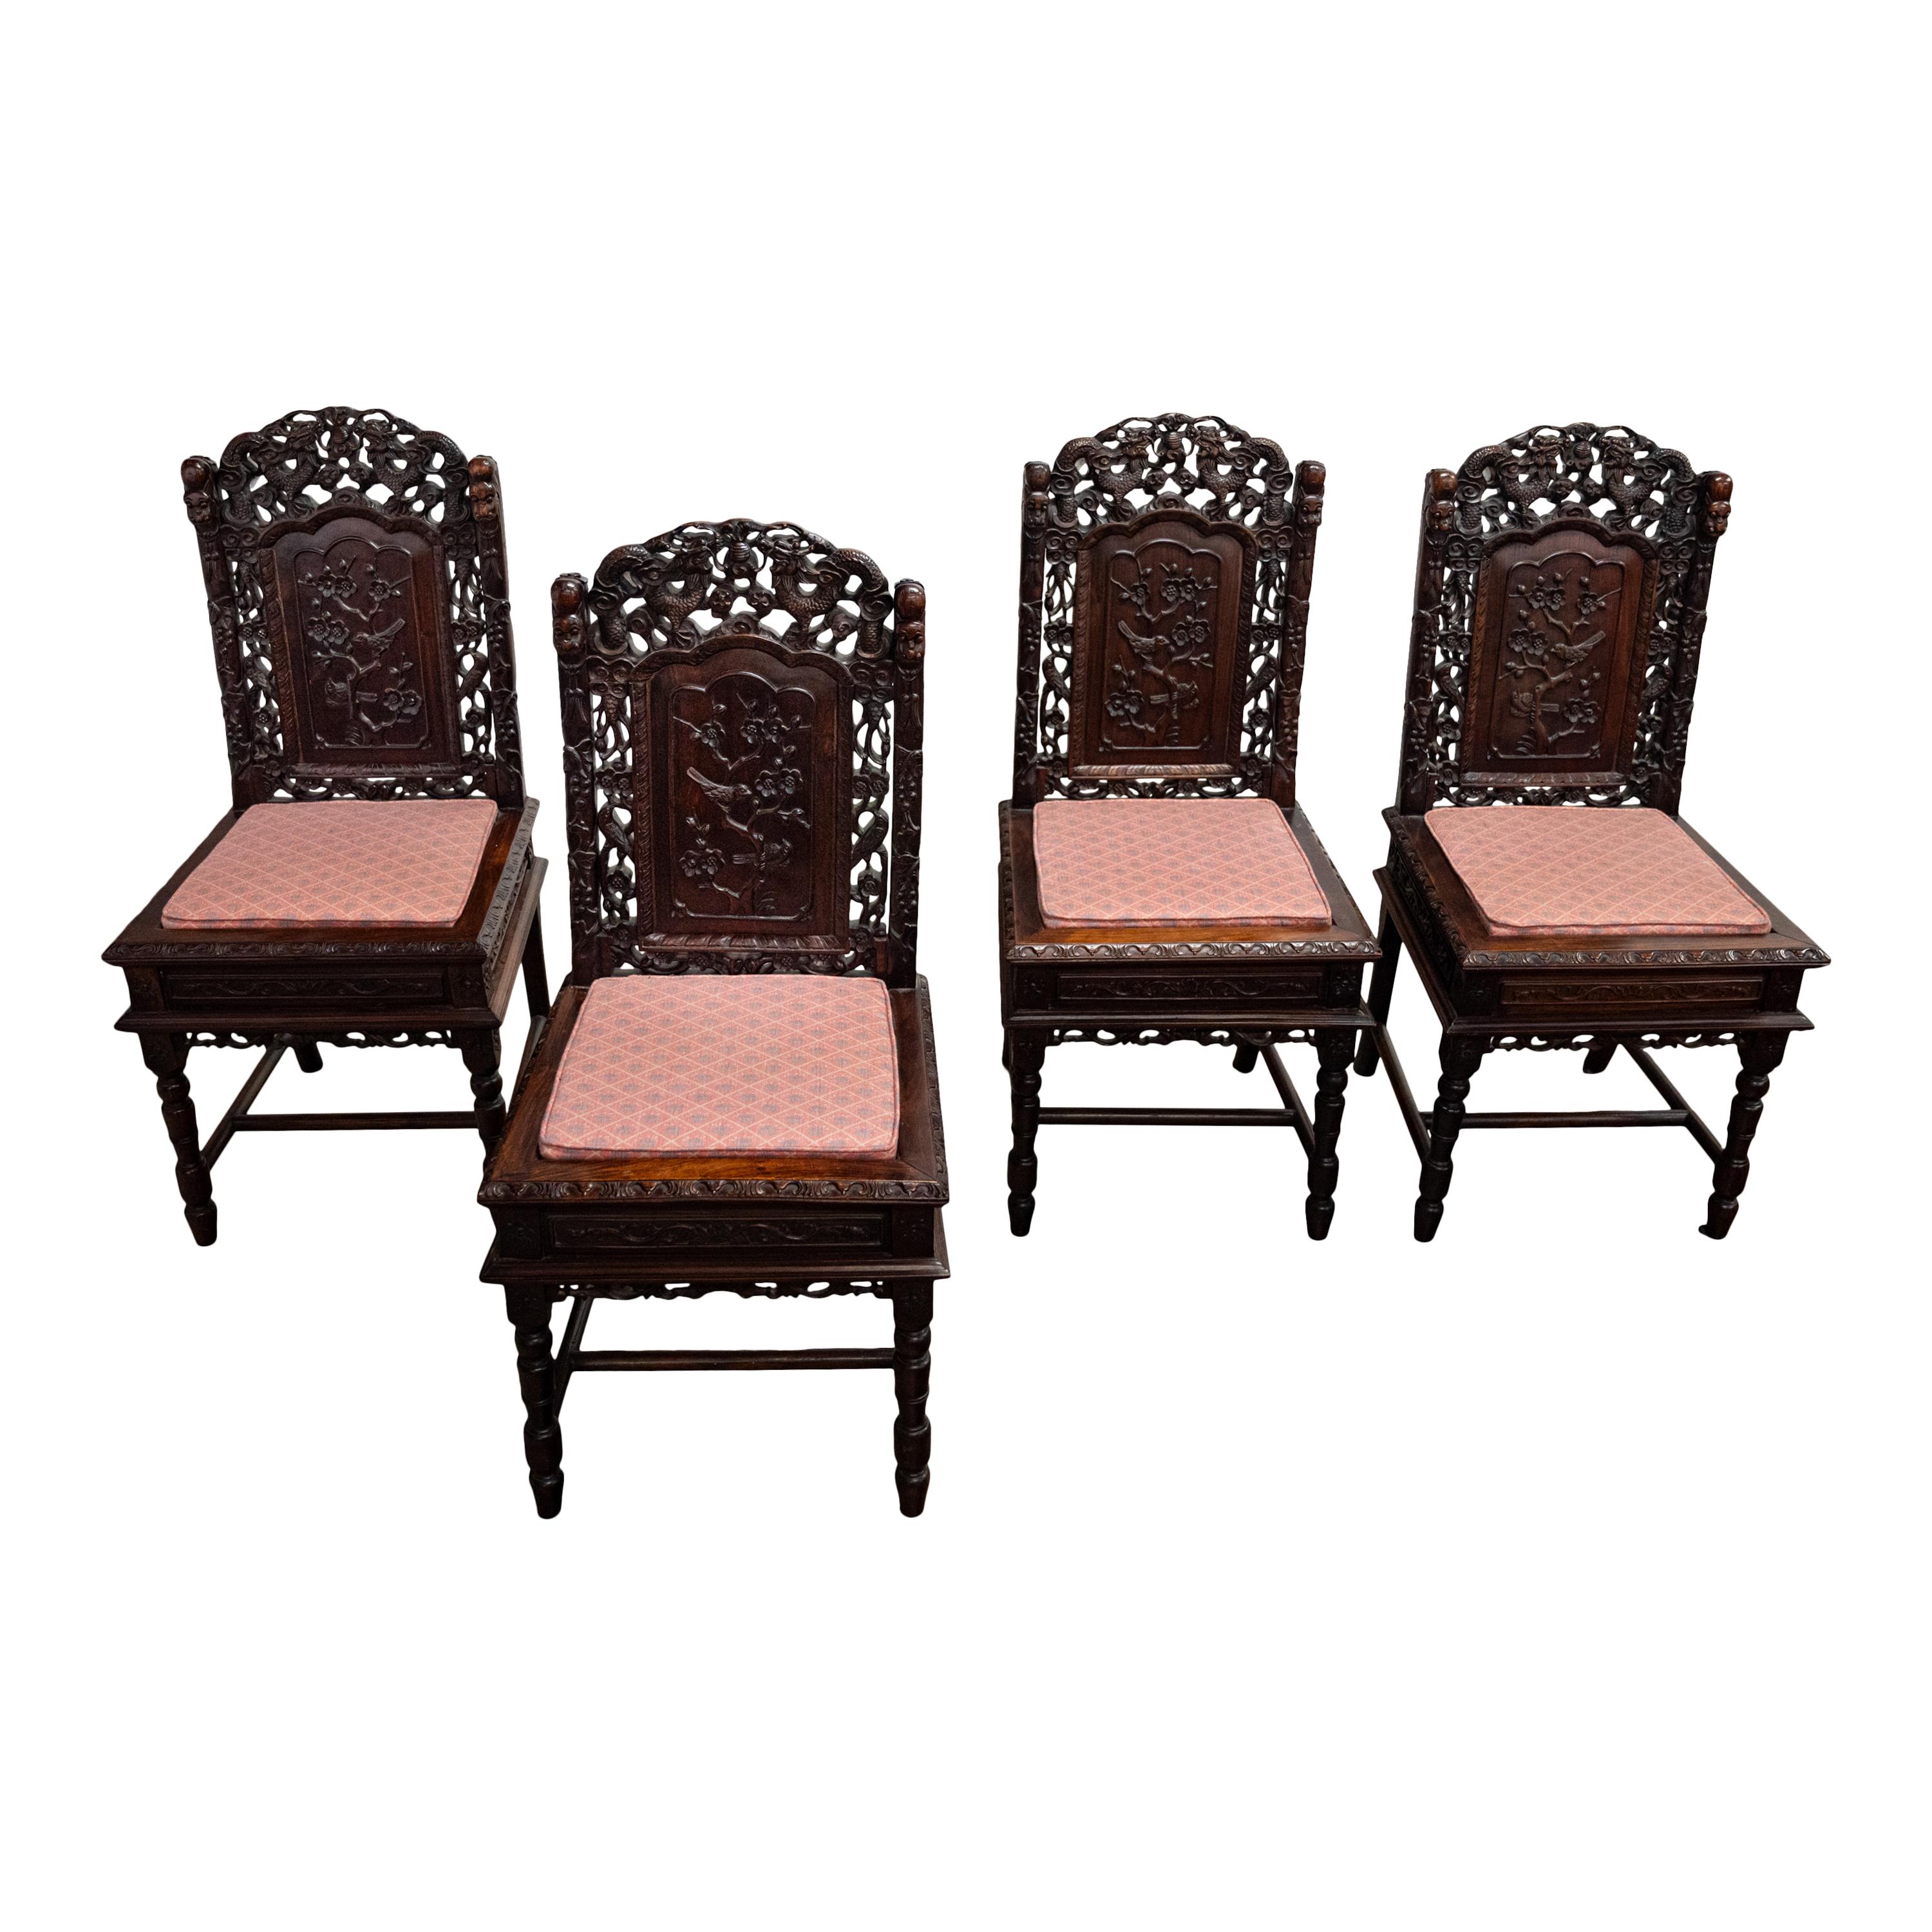 Four Antique Qing Dynasty Chinese Carved Rosewood Side Dining Dragon Chairs 1880 For Sale 1